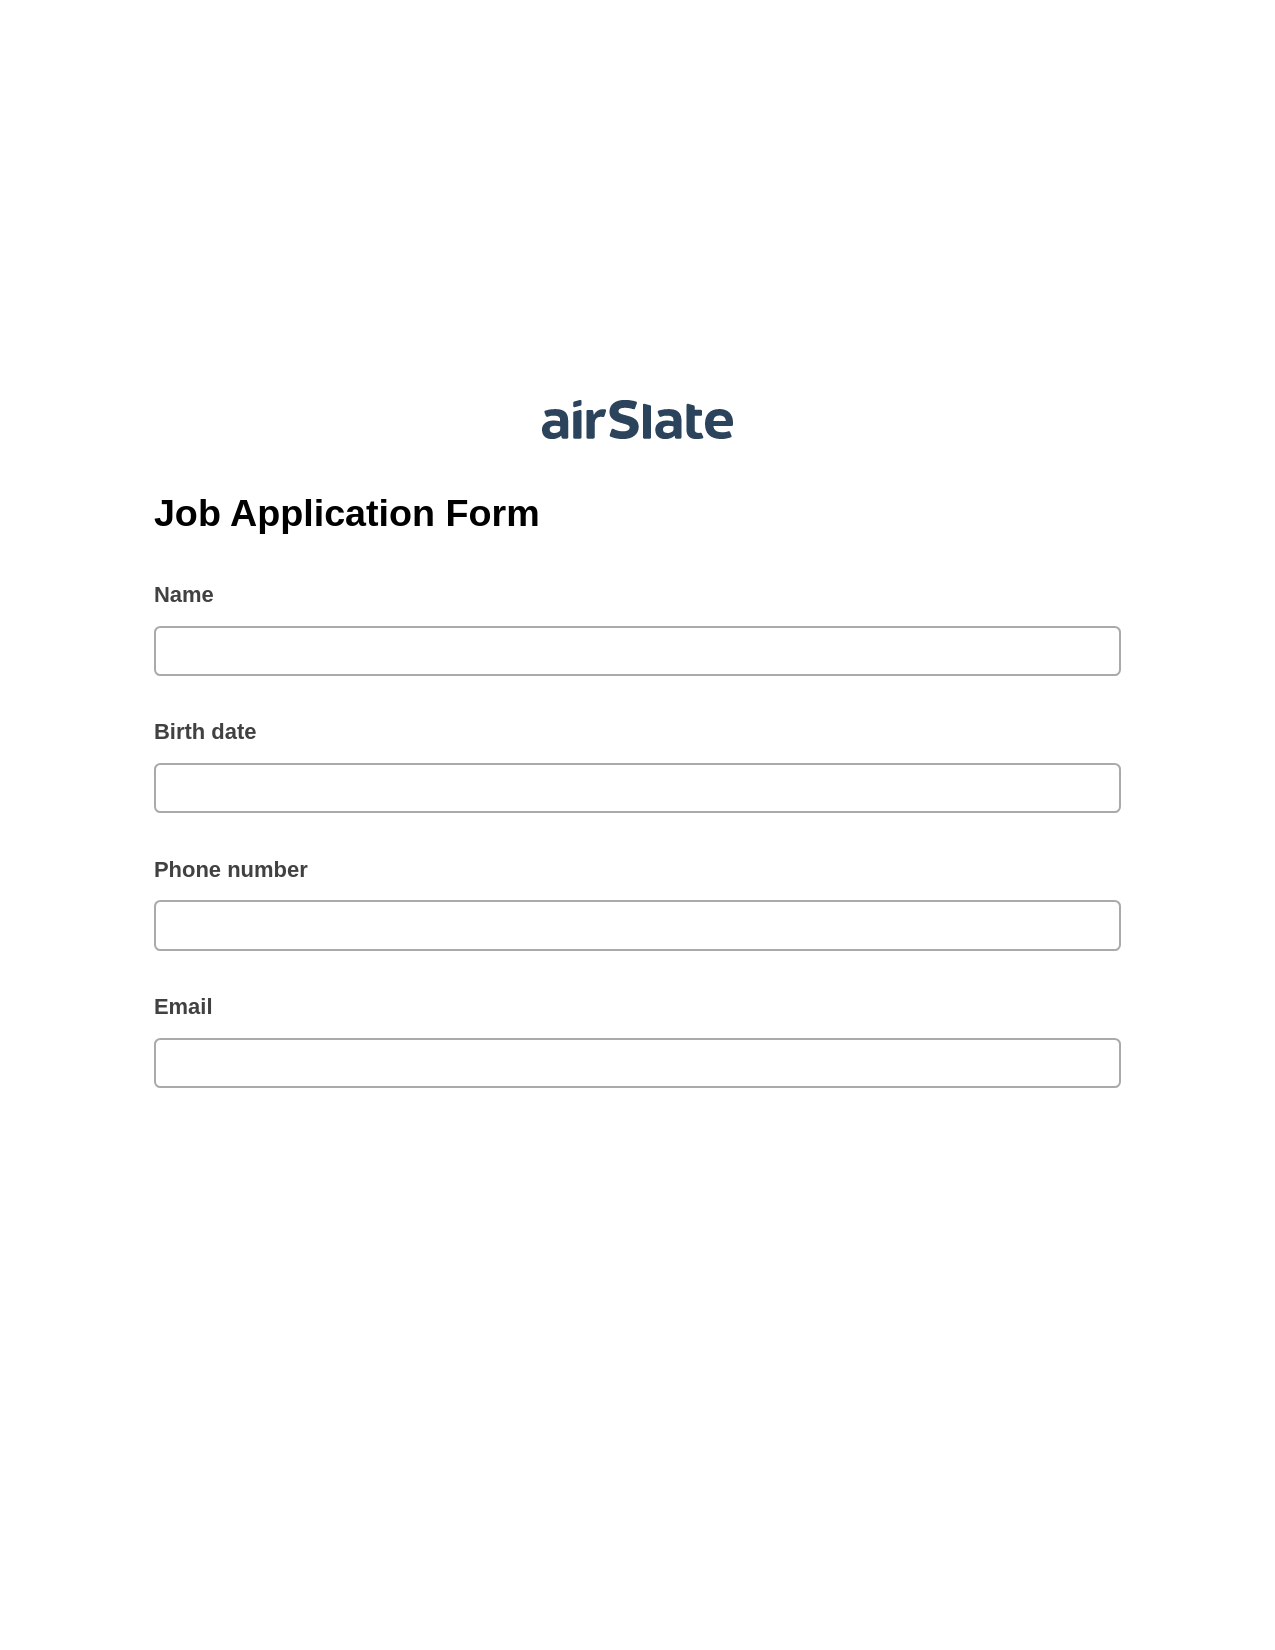 Job Application Form Pre-fill Slate from MS Dynamics 365 Records Bot, Create Slate every Google Sheet Update Bot, Archive to SharePoint Folder Bot